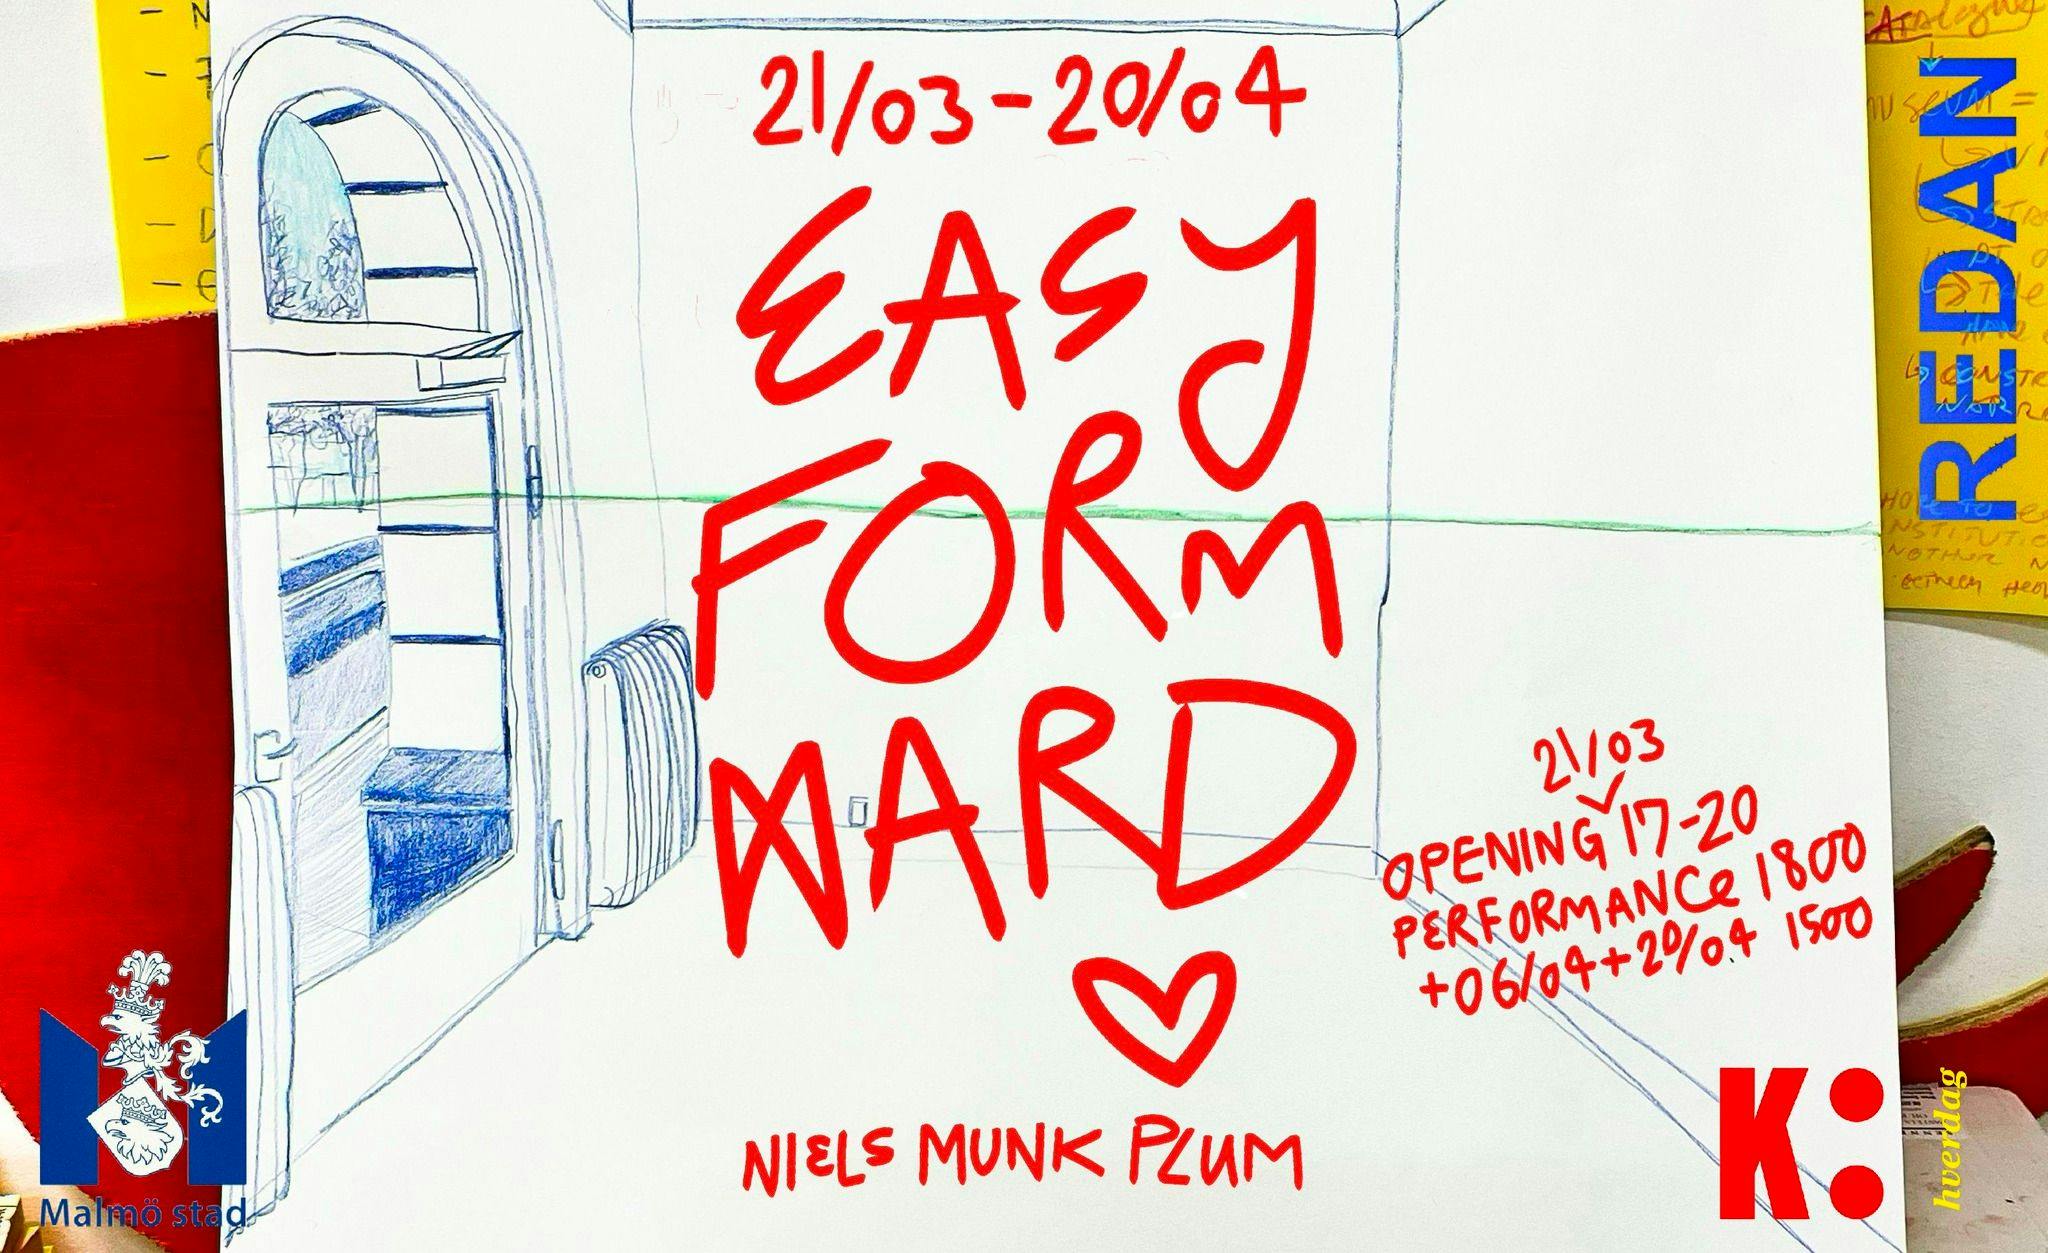 Cover image from EASY FORM HARD